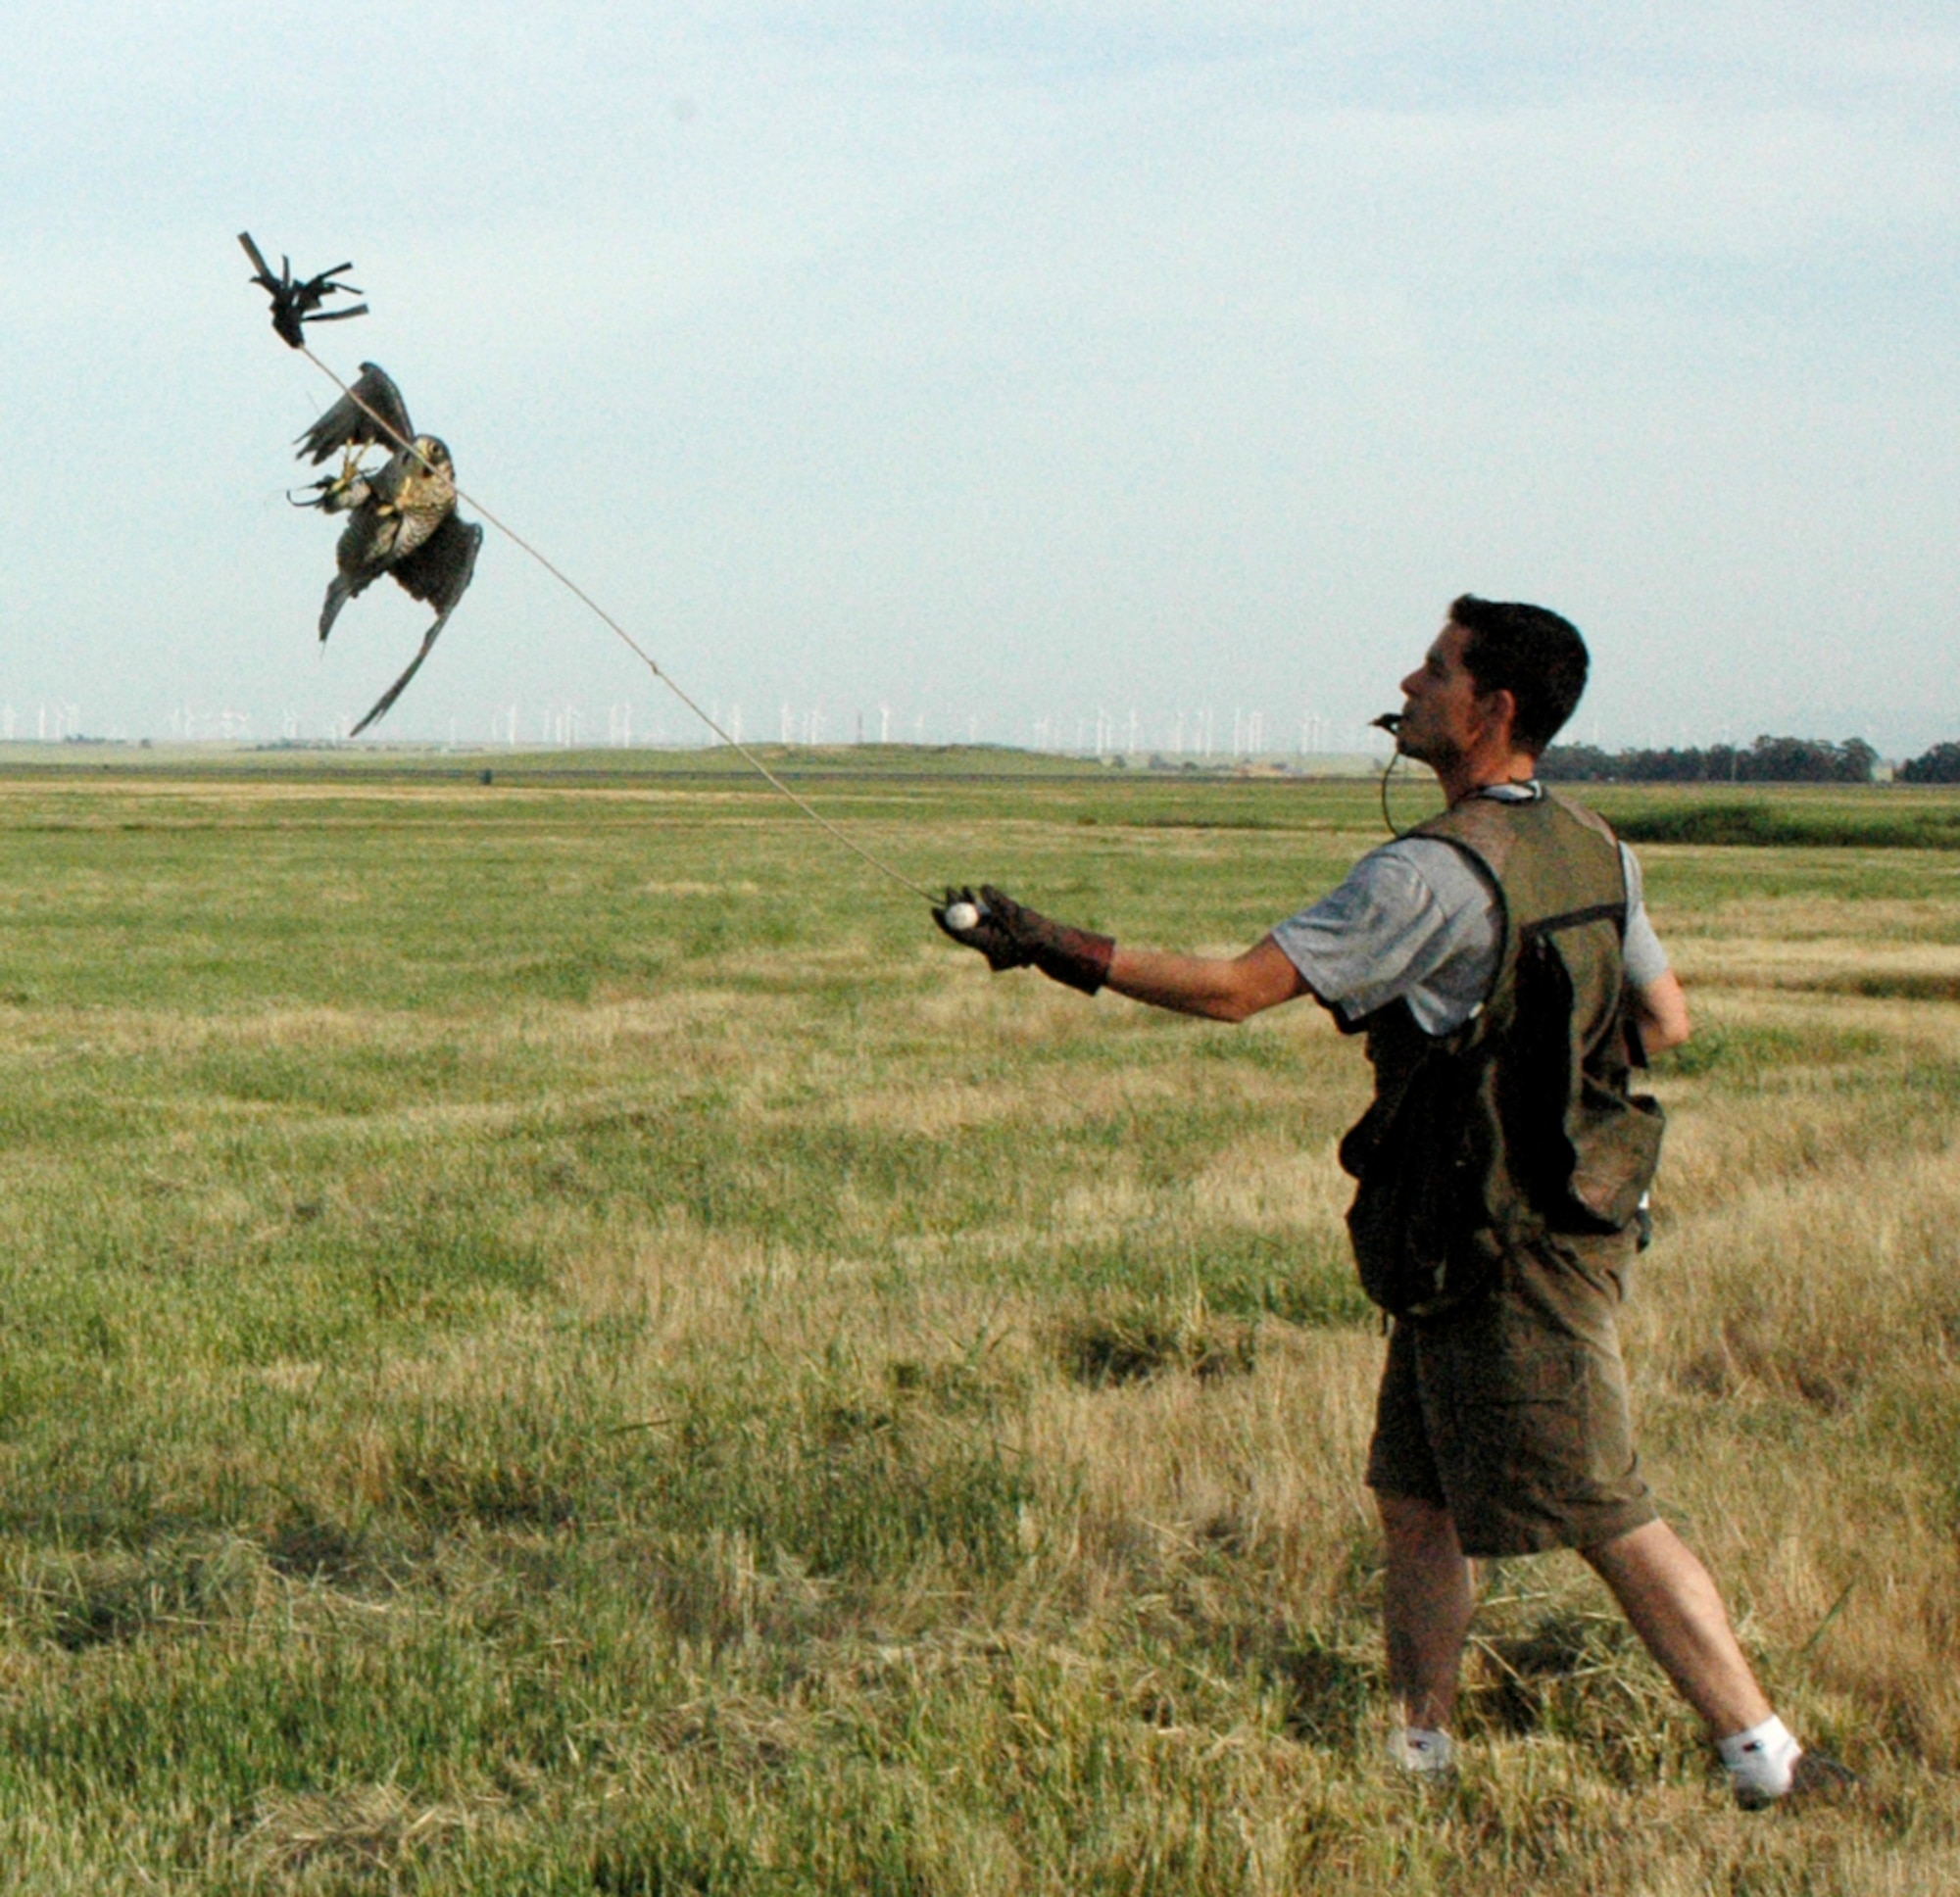 Falcons rely on thermal updrafts of air to keep them aloft at a couple thousand feet. They rely on the ability to swoop down on their prey from above without even being noticed.  The falconers here try to keep their birds below 300 feet. They are more interested in scaring the birds away rather killing them. (U.S. Air Force photo by Staff Sgt. Raymond Hoy)